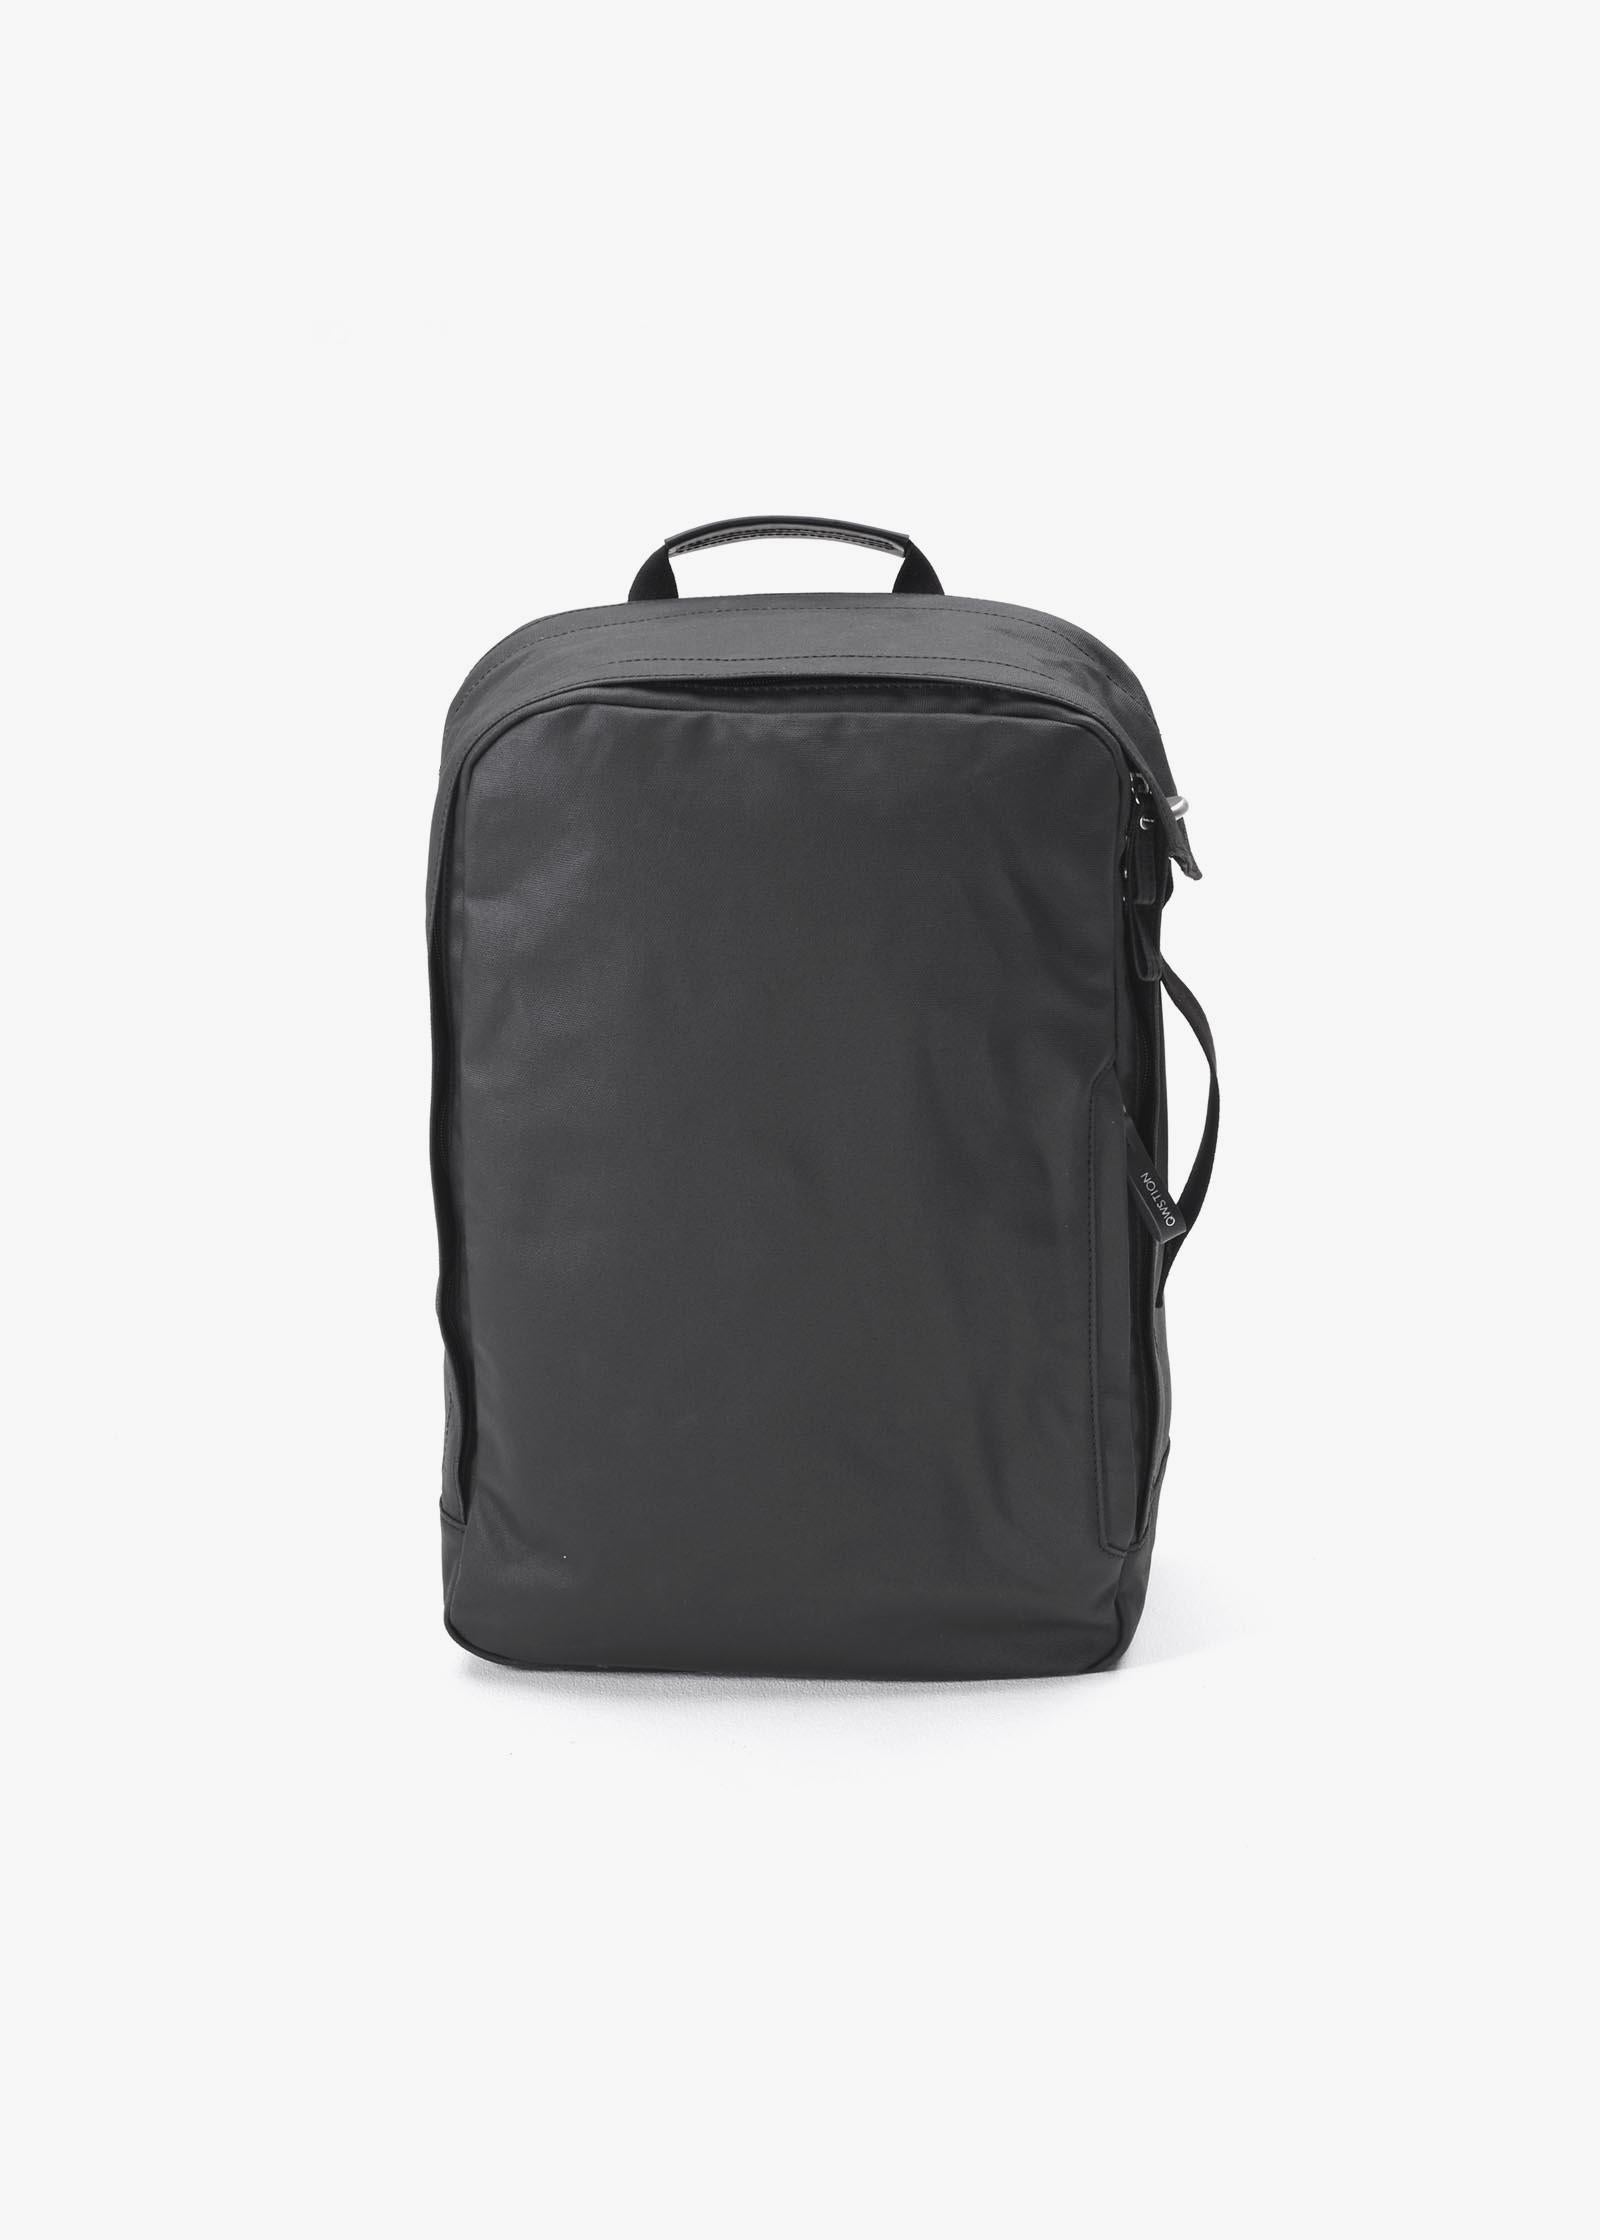 Backpack – Organic Jet Black - QWSTION